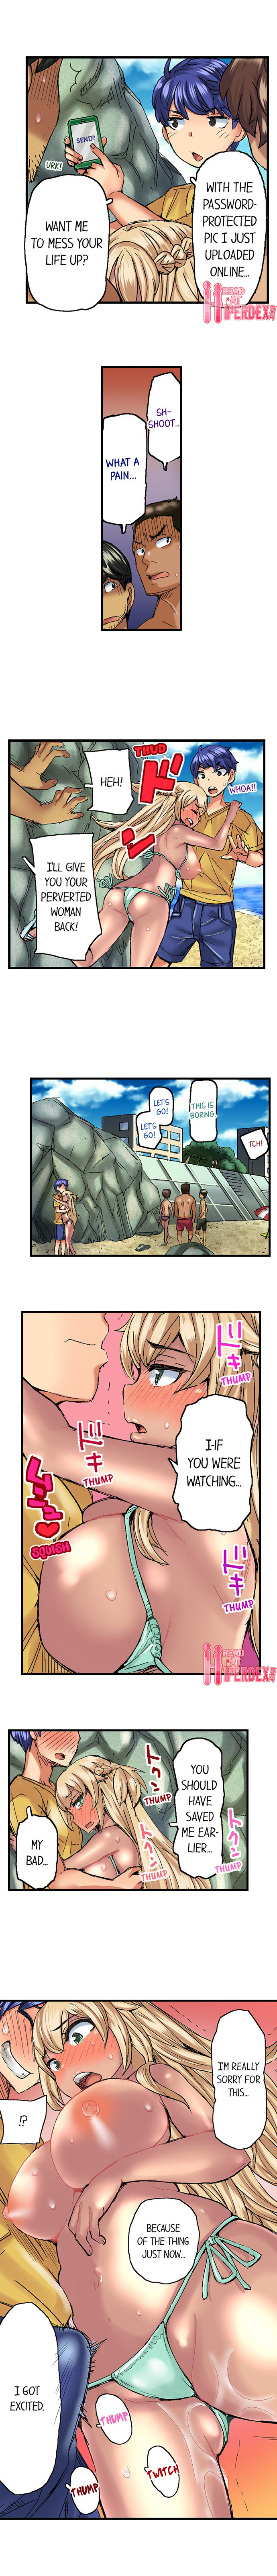 Taking a Hot Tanned Chick’s Virginity - Chapter 17 Page 9